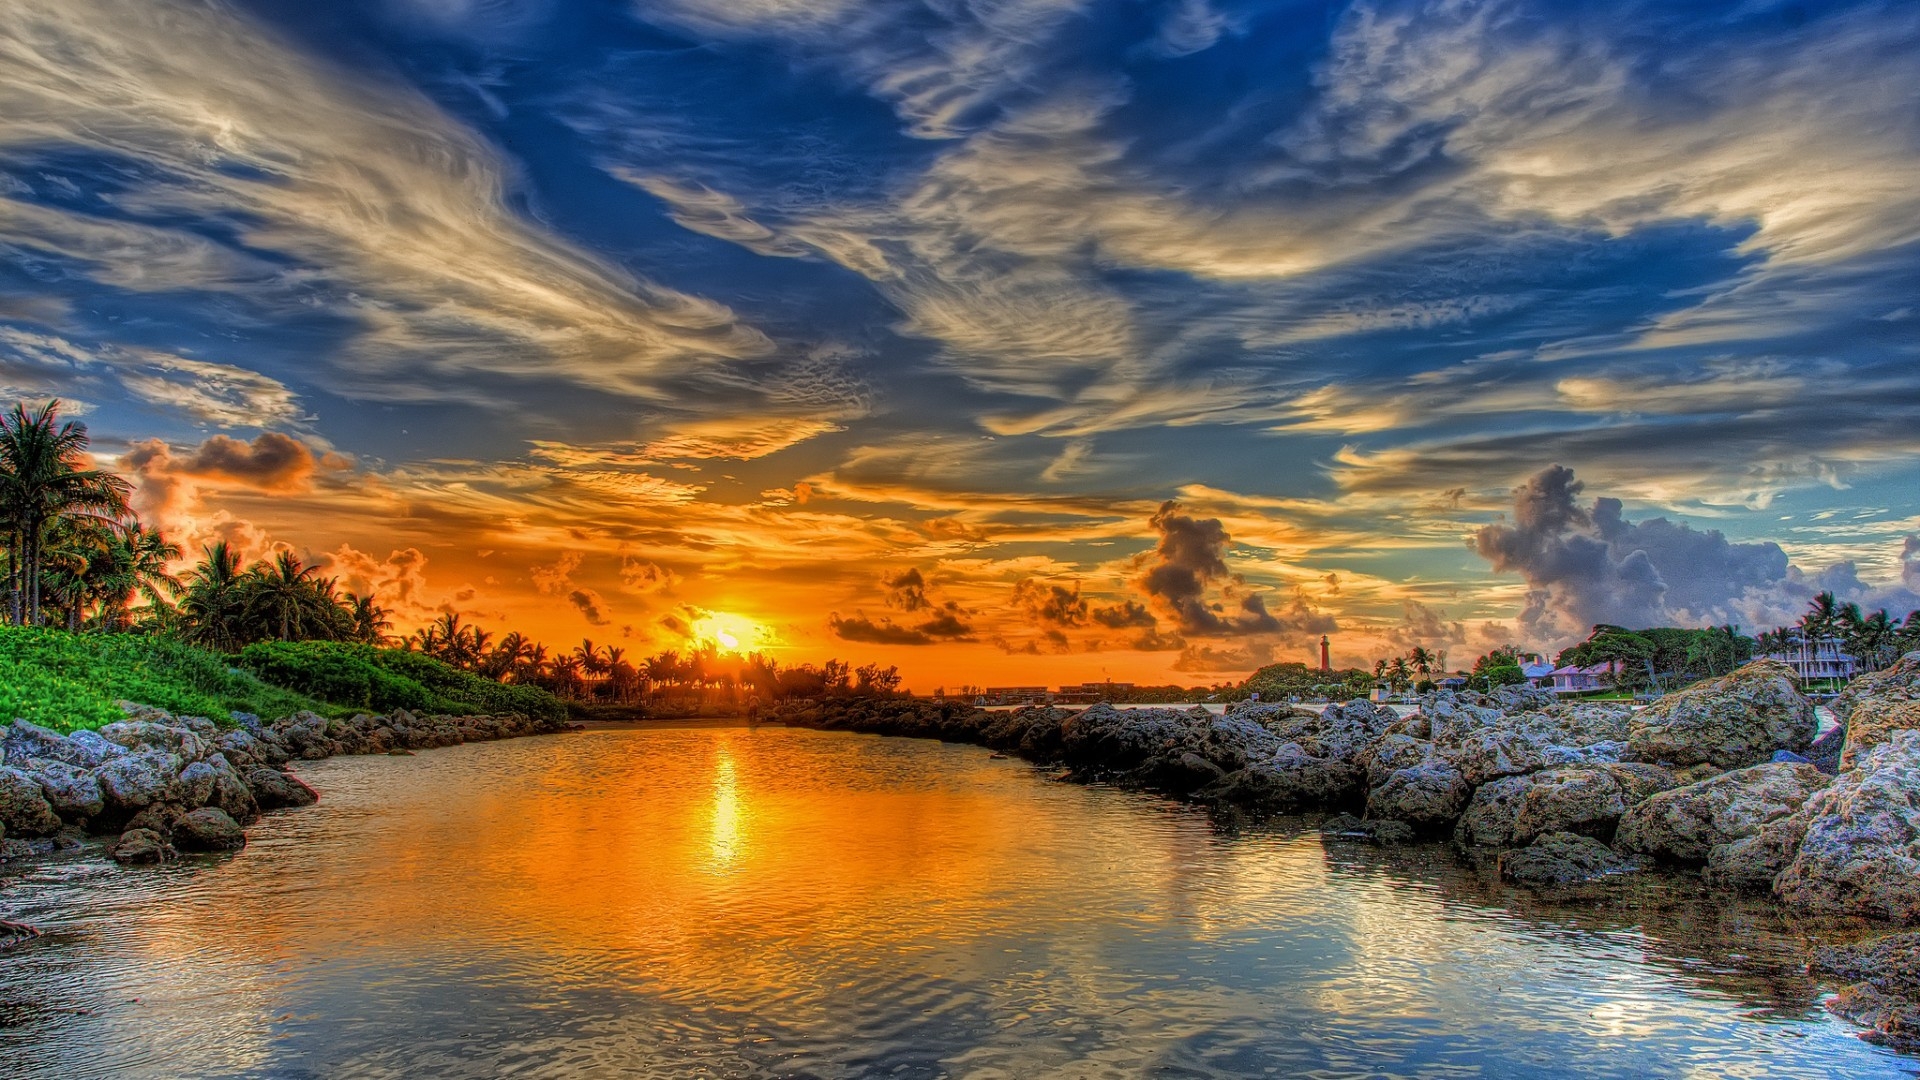 Beautiful Sunset Reflection for 1920 x 1080 HDTV 1080p resolution